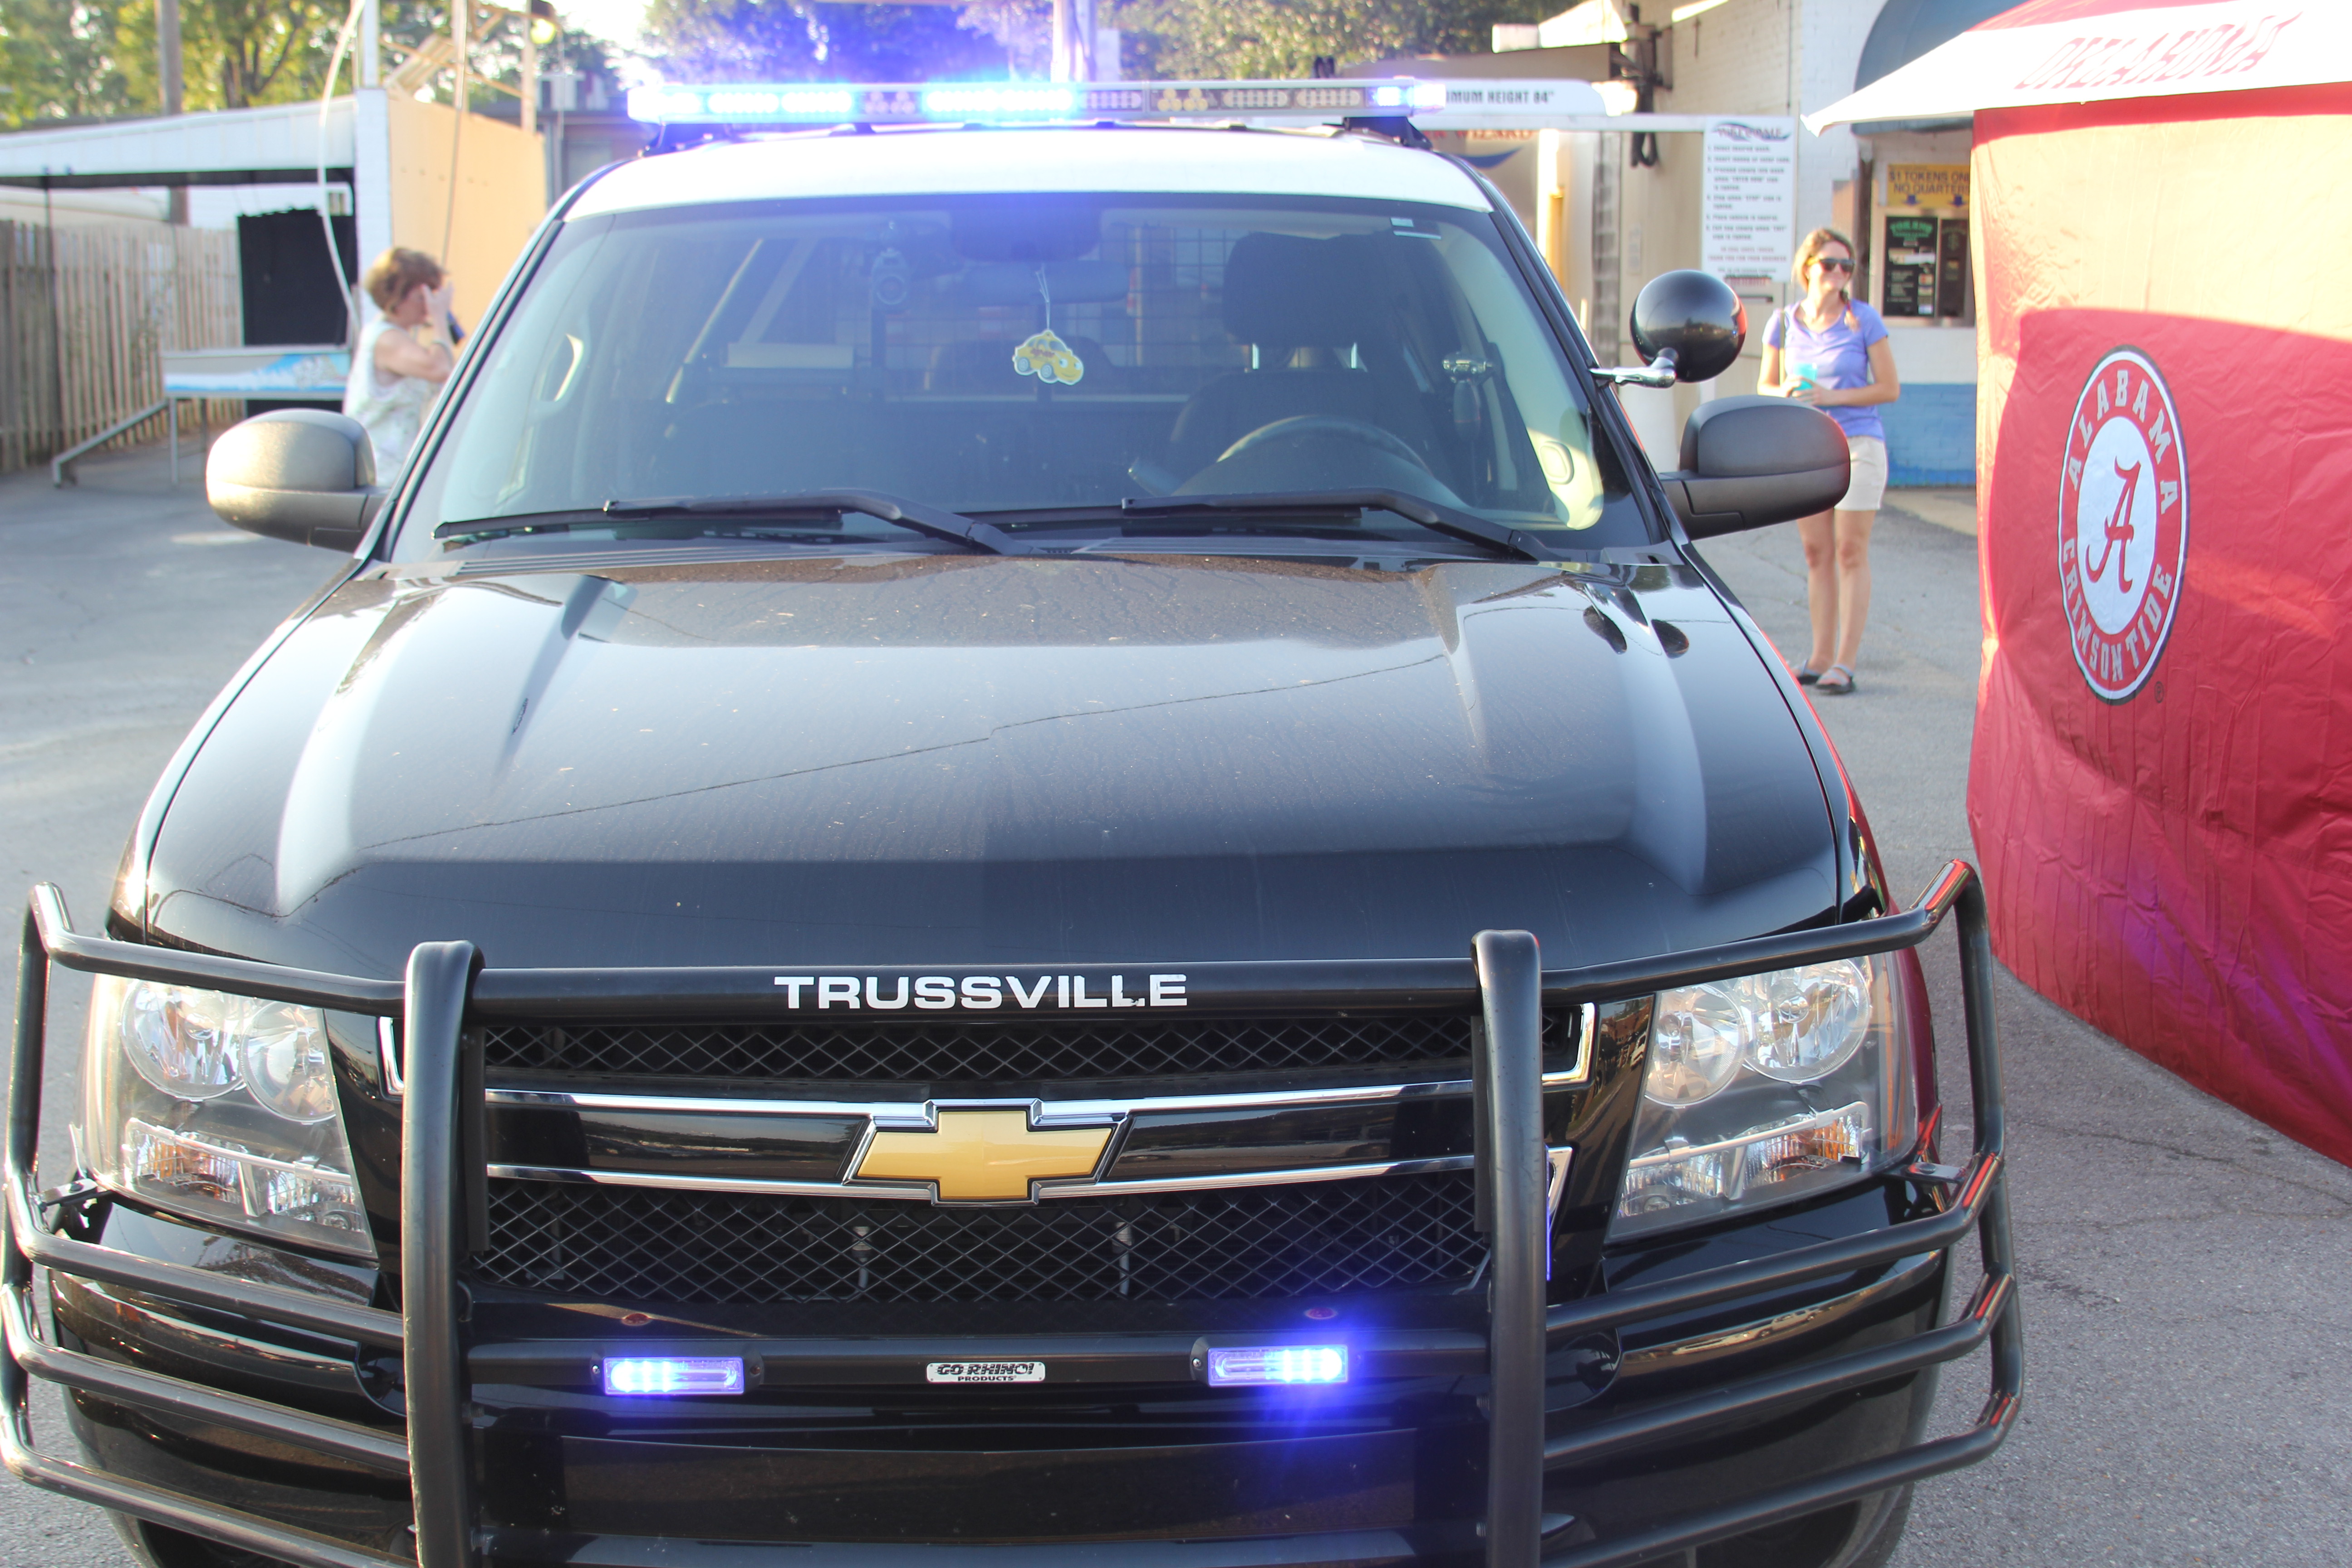 Lack of cooperation prompts Trussville police to deactivate McDonald's armed robbery investigation